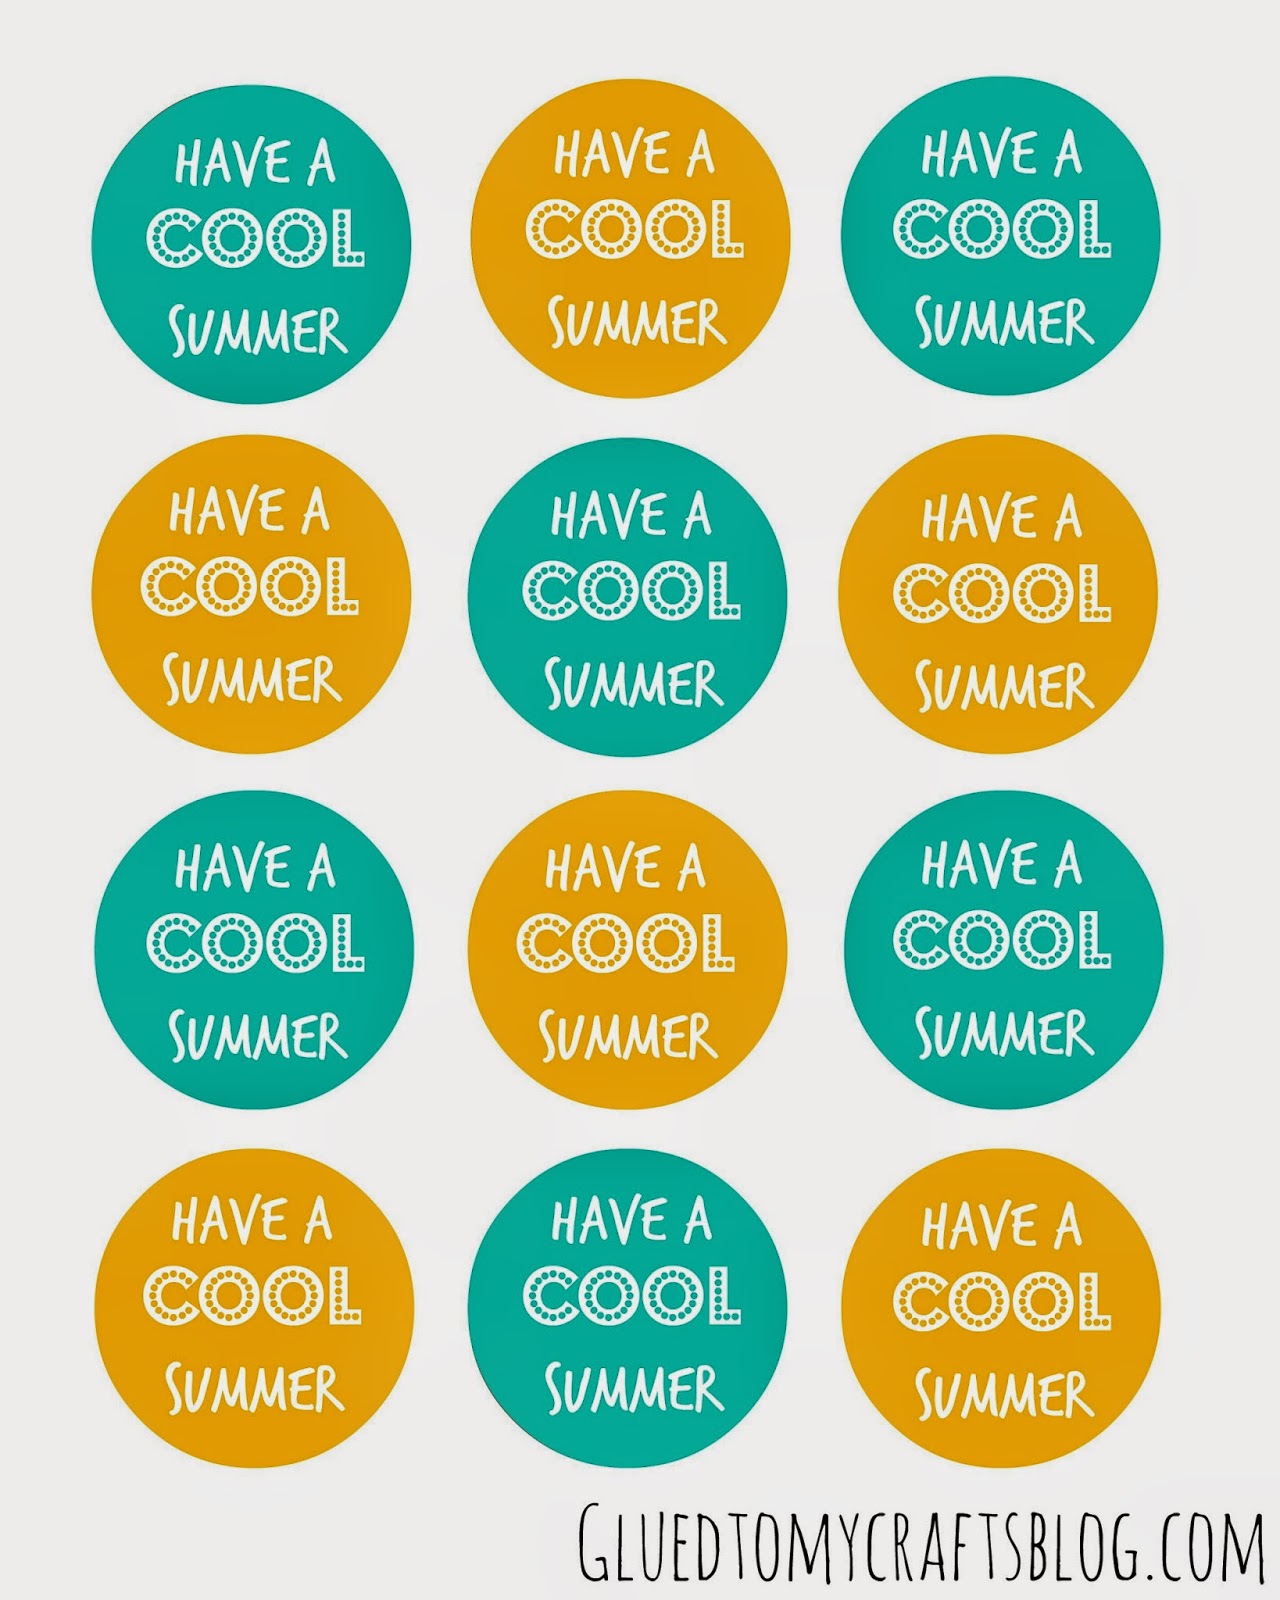 6 Best Images of Have A Crazy Cool Summer Printable Have a Cool